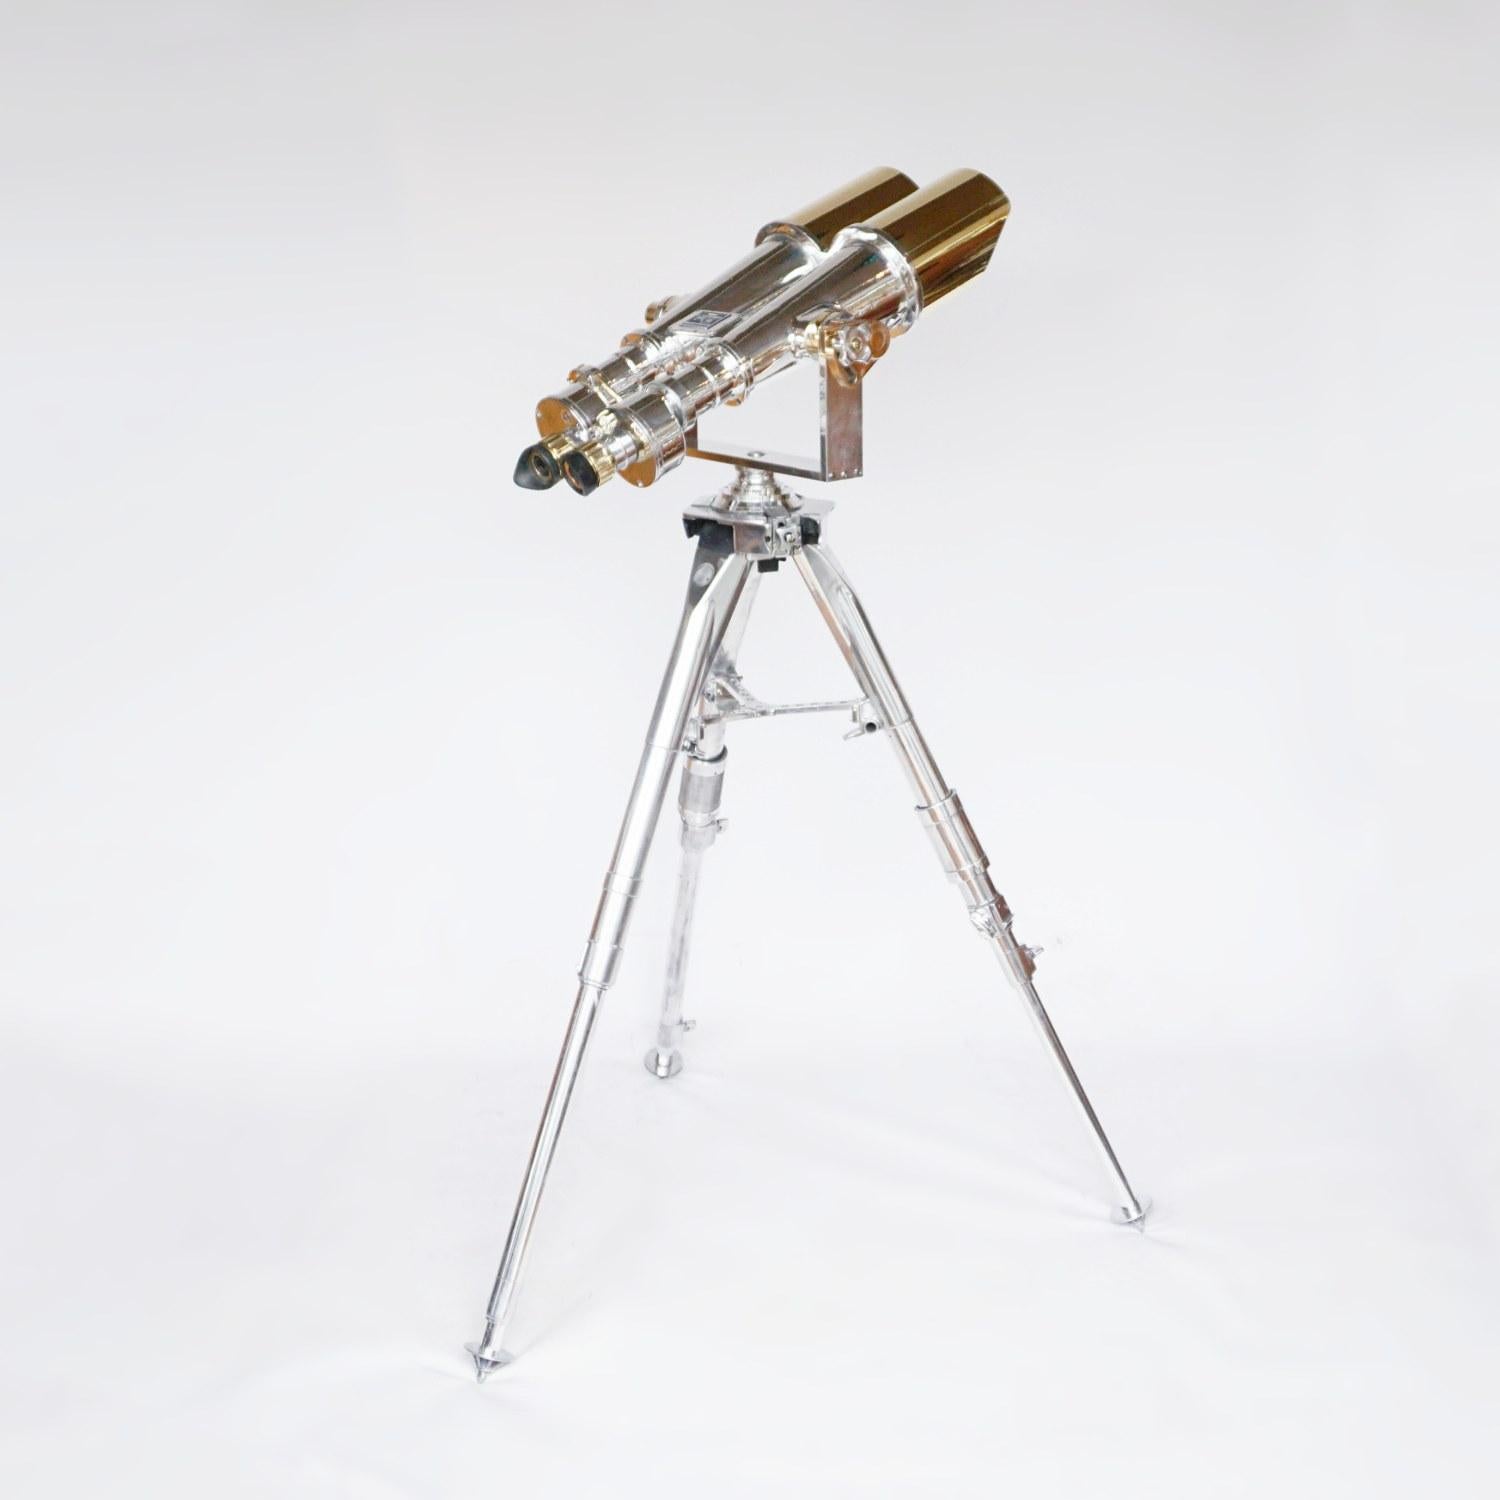 Chromed metal and brass Nikon 20x120 WW11 Naval Binoculars. Set on an original Zeiss 1960's military, re-polished metal stand.

20x magnification with 120mm objective lenses. Paint stripped and metal polished. Optics fully